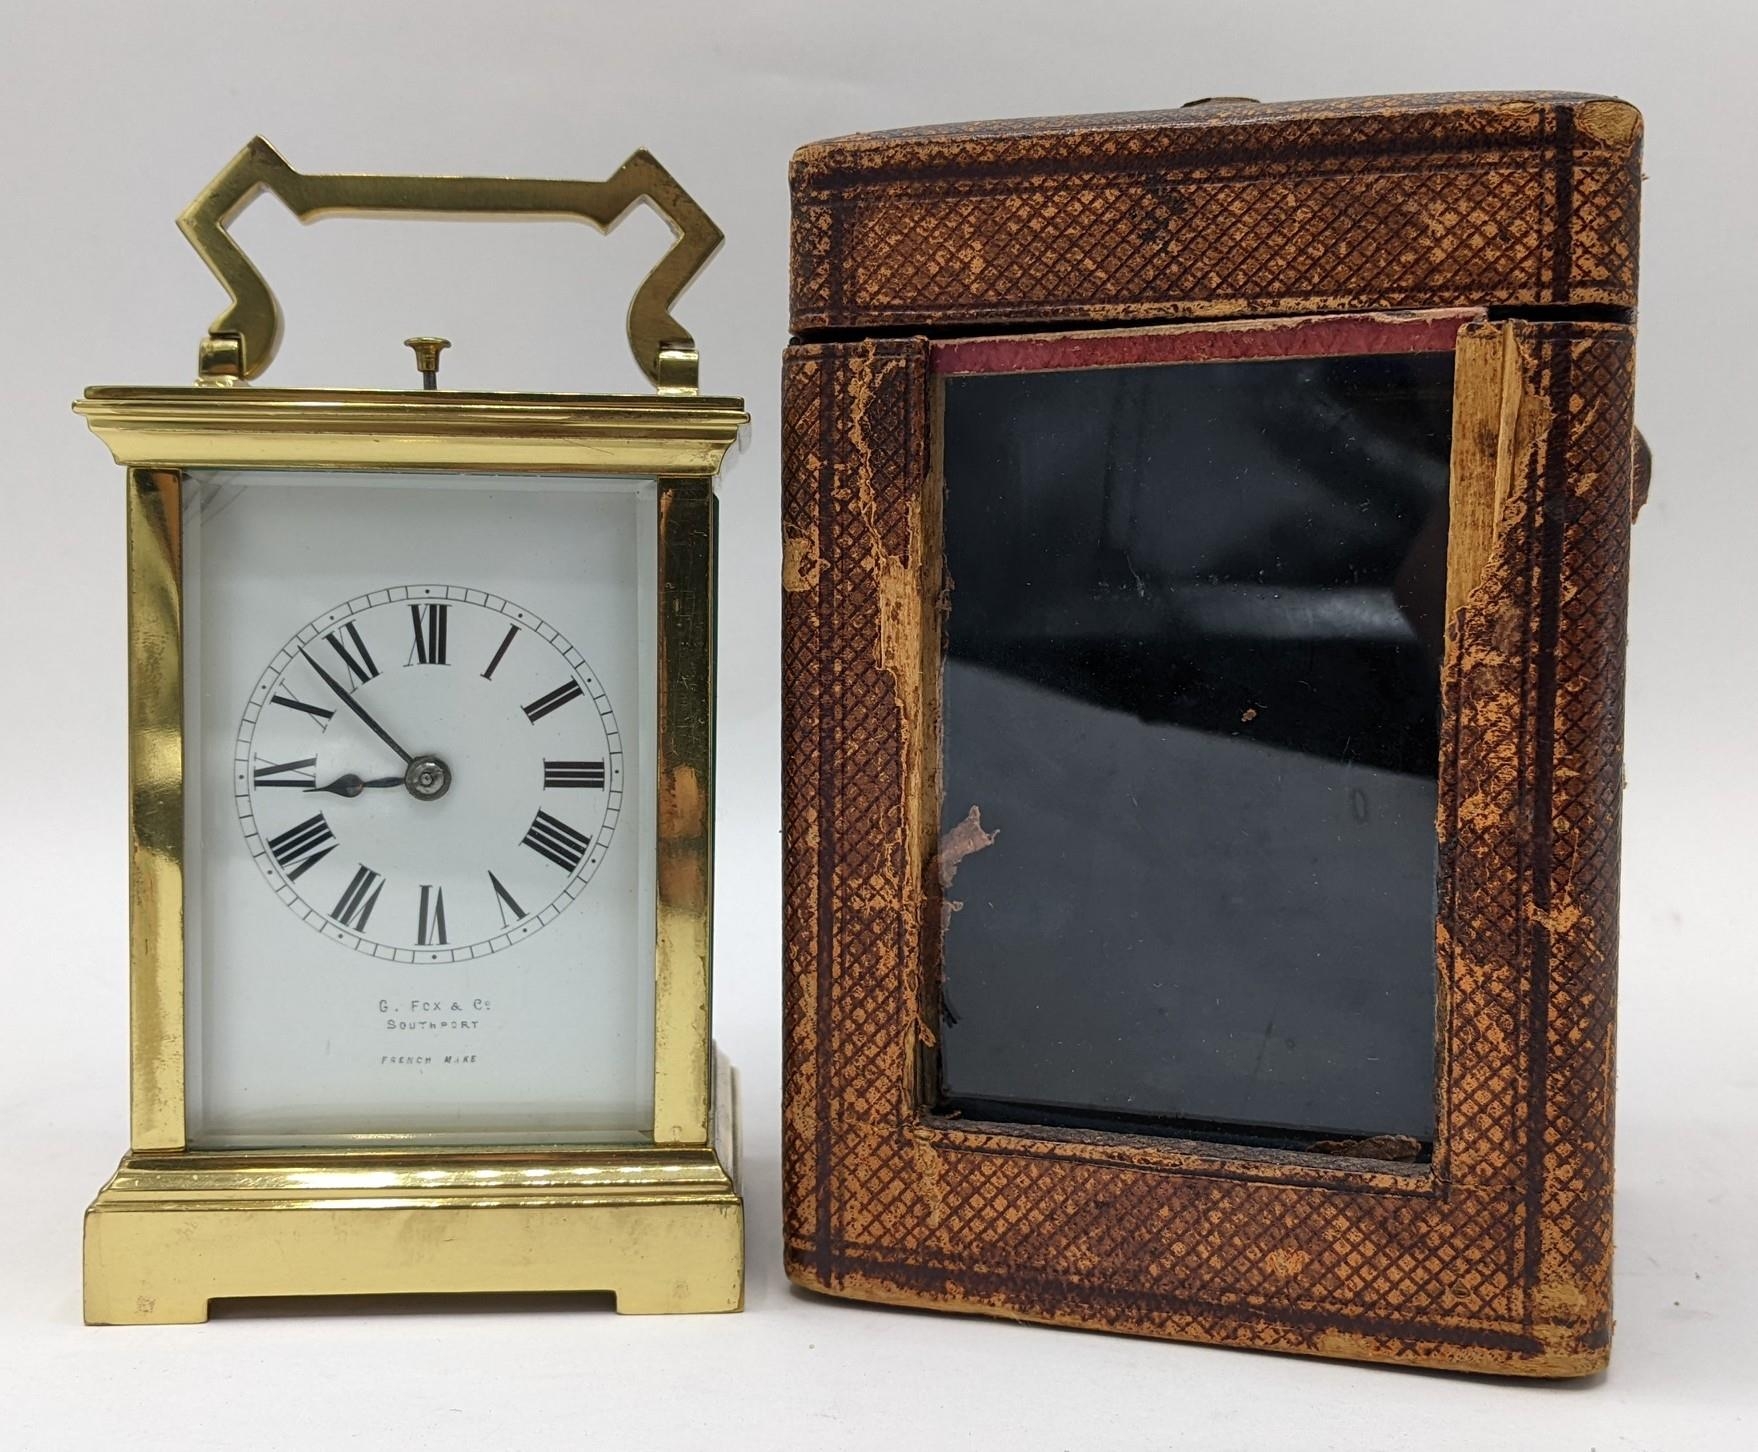 An early 20th century brass cased repeater carriage clock, the white enamel dial having Roman